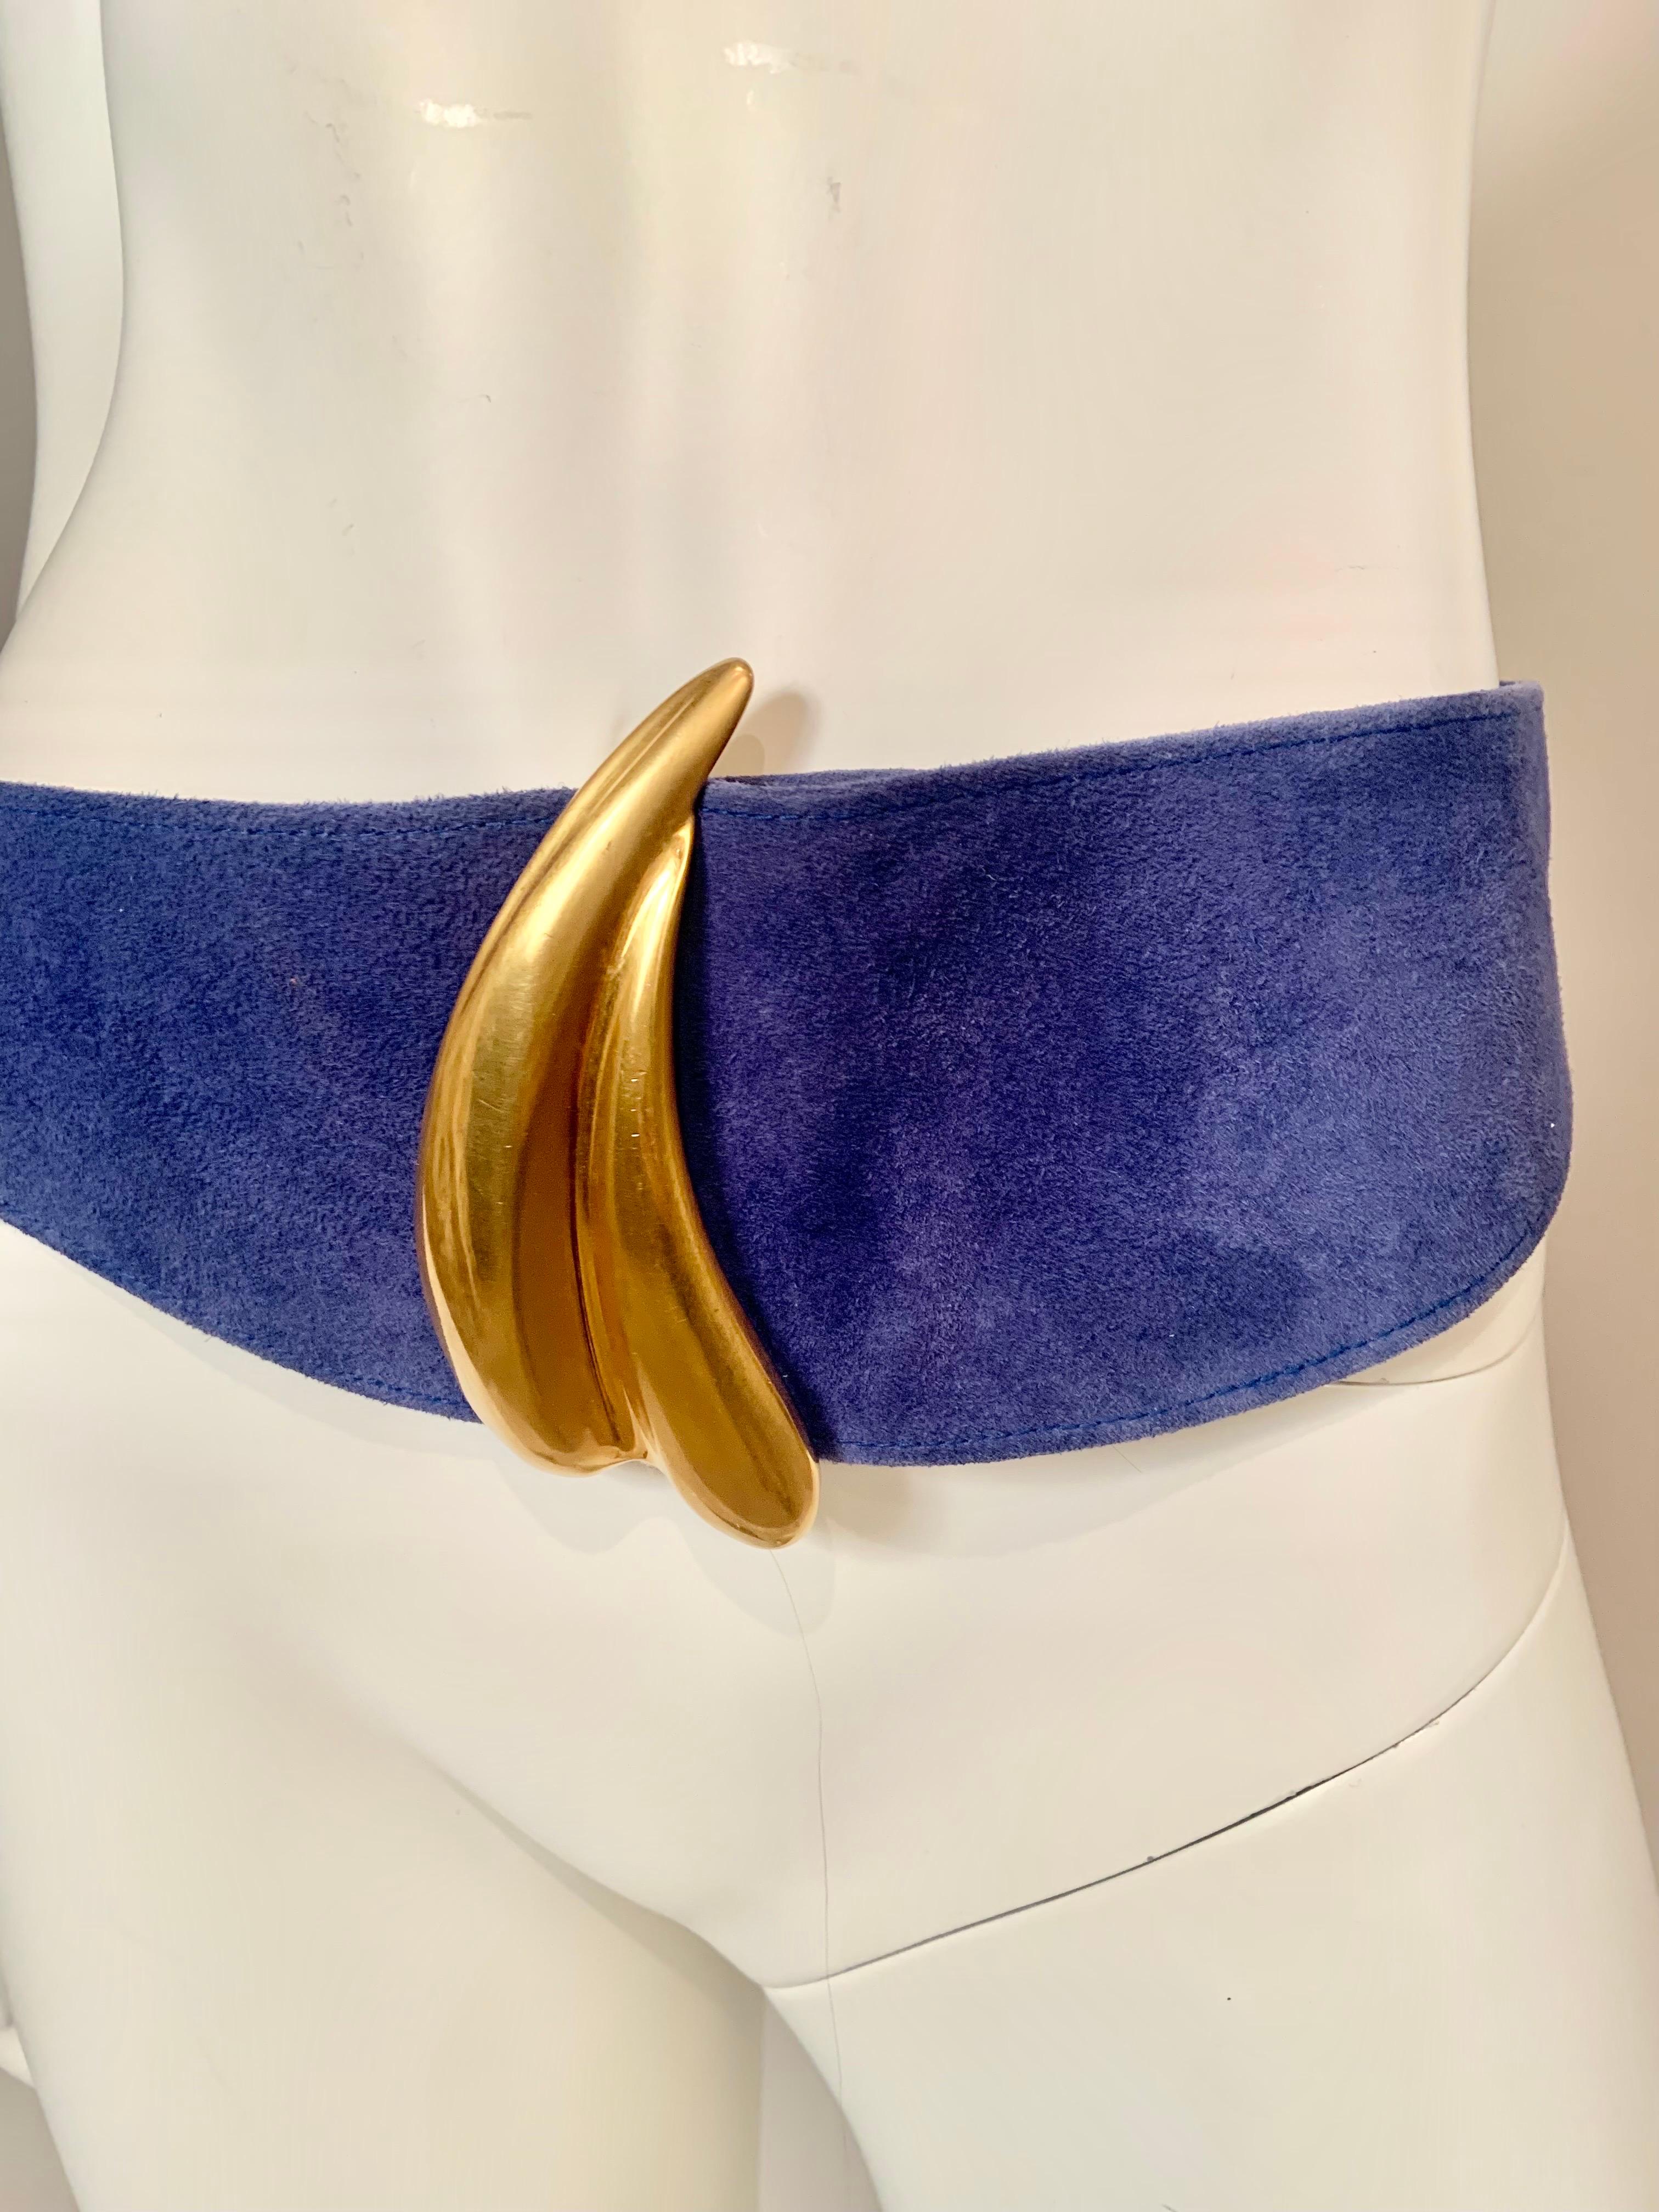 A dramatic Robert Lee Morris buckle in gold toned metal adorns a French blue suede belt from Donna Karan.  The belt is quite wide in the front and narrow in the back. I have shown it worn in two ways, this gives you a different, heart shaped look